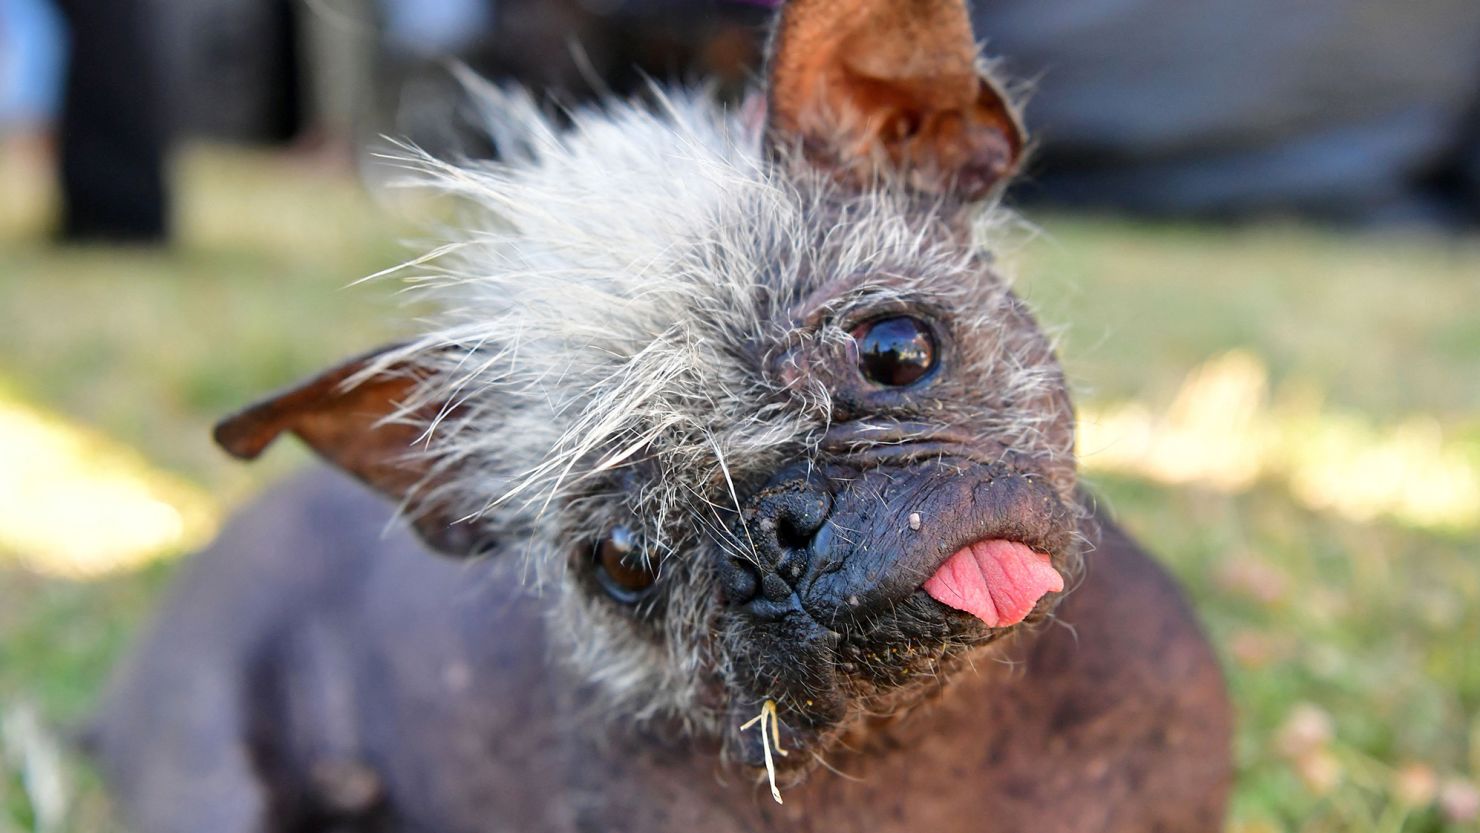 Mr. Happy Face, the 2022 winner of the World's Ugliest Dog Competition, looks towards the camera. The contest is currently soliciting entries for its 2023 showdown. 